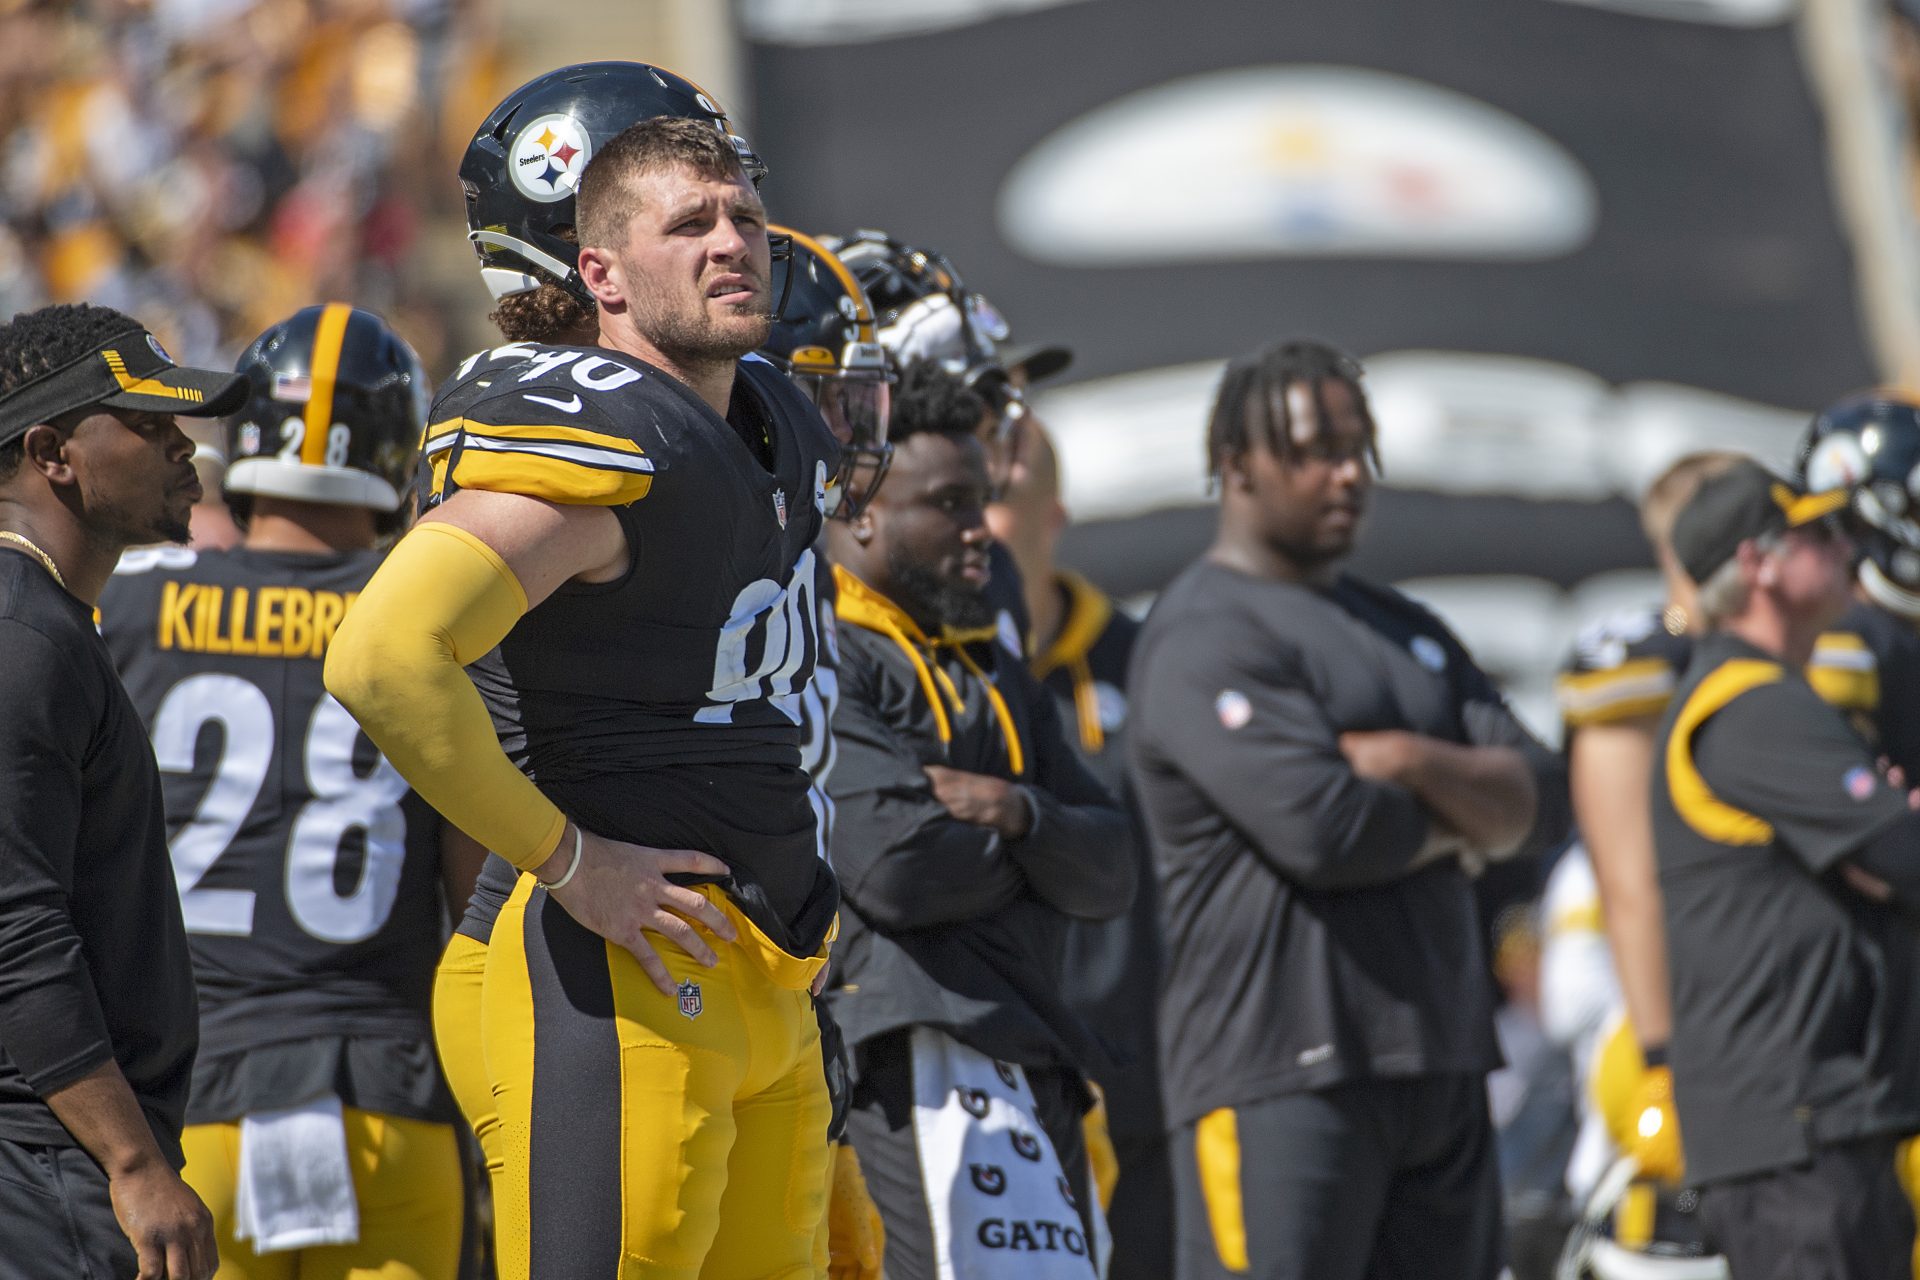 Pittsburgh Steelers outside linebacker T.J. Watt stands on the sidelines after being injured during the first half of an NFL football game against the Las Vegas Raiders, Sunday, Sept. 19, 2021, in Pittsburgh.